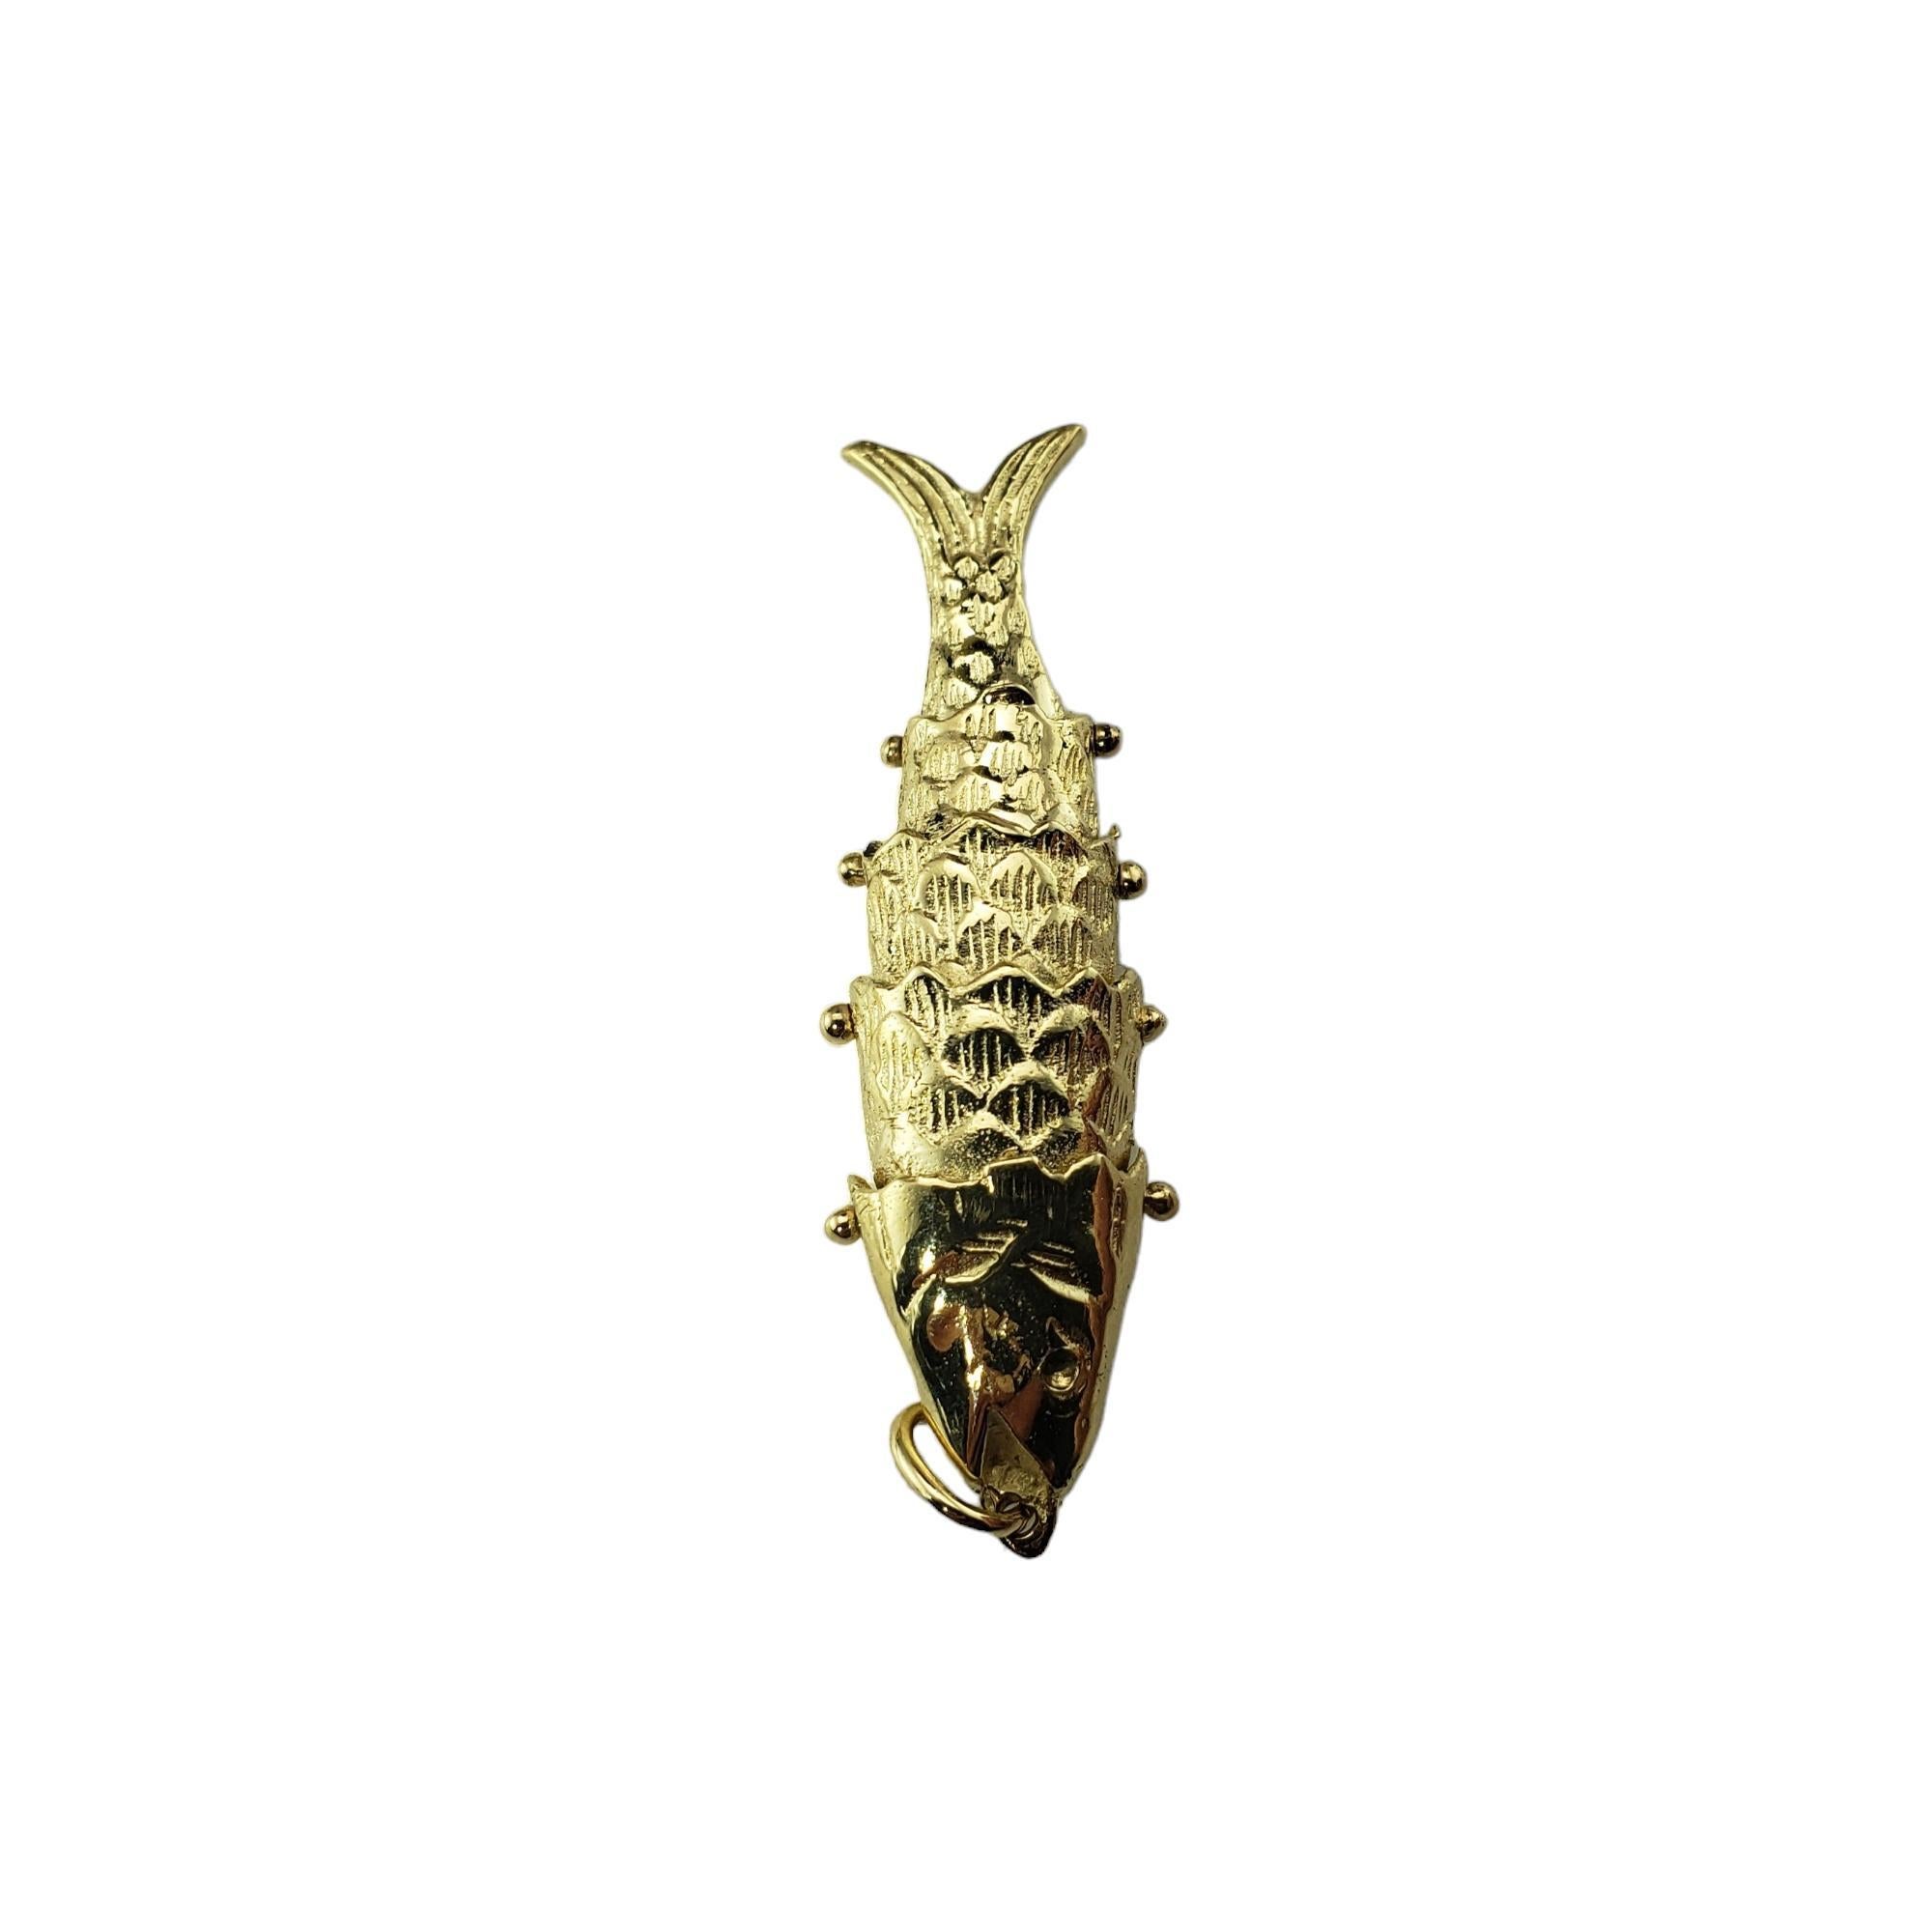 Vintage 14 Karat Yellow Gold Flexible Fish Pendant-

This lovely flexible fish pendant is crafted in beautifully detailed 14K yellow gold.

Size: 46.4 mm x 13.2 mm

Weight:  6.6 gr./ 4.2 dwt.

Very good condition, professionally polished.

Will come